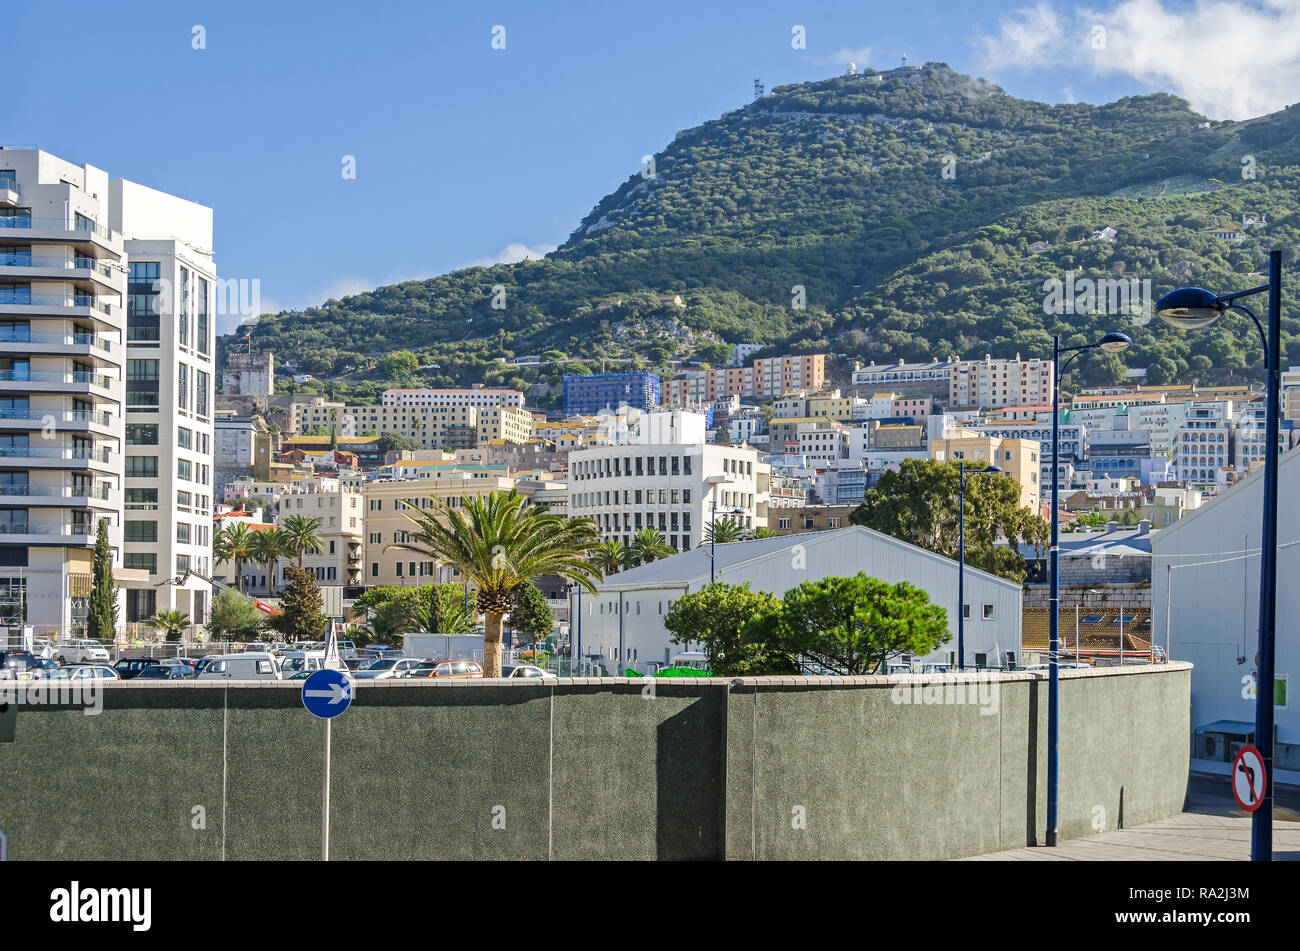 Gibraltar, British Overseas Territory -  November 8, 2018: Rock of Gibraltar and a densely populated town area with residential apartments Stock Photo